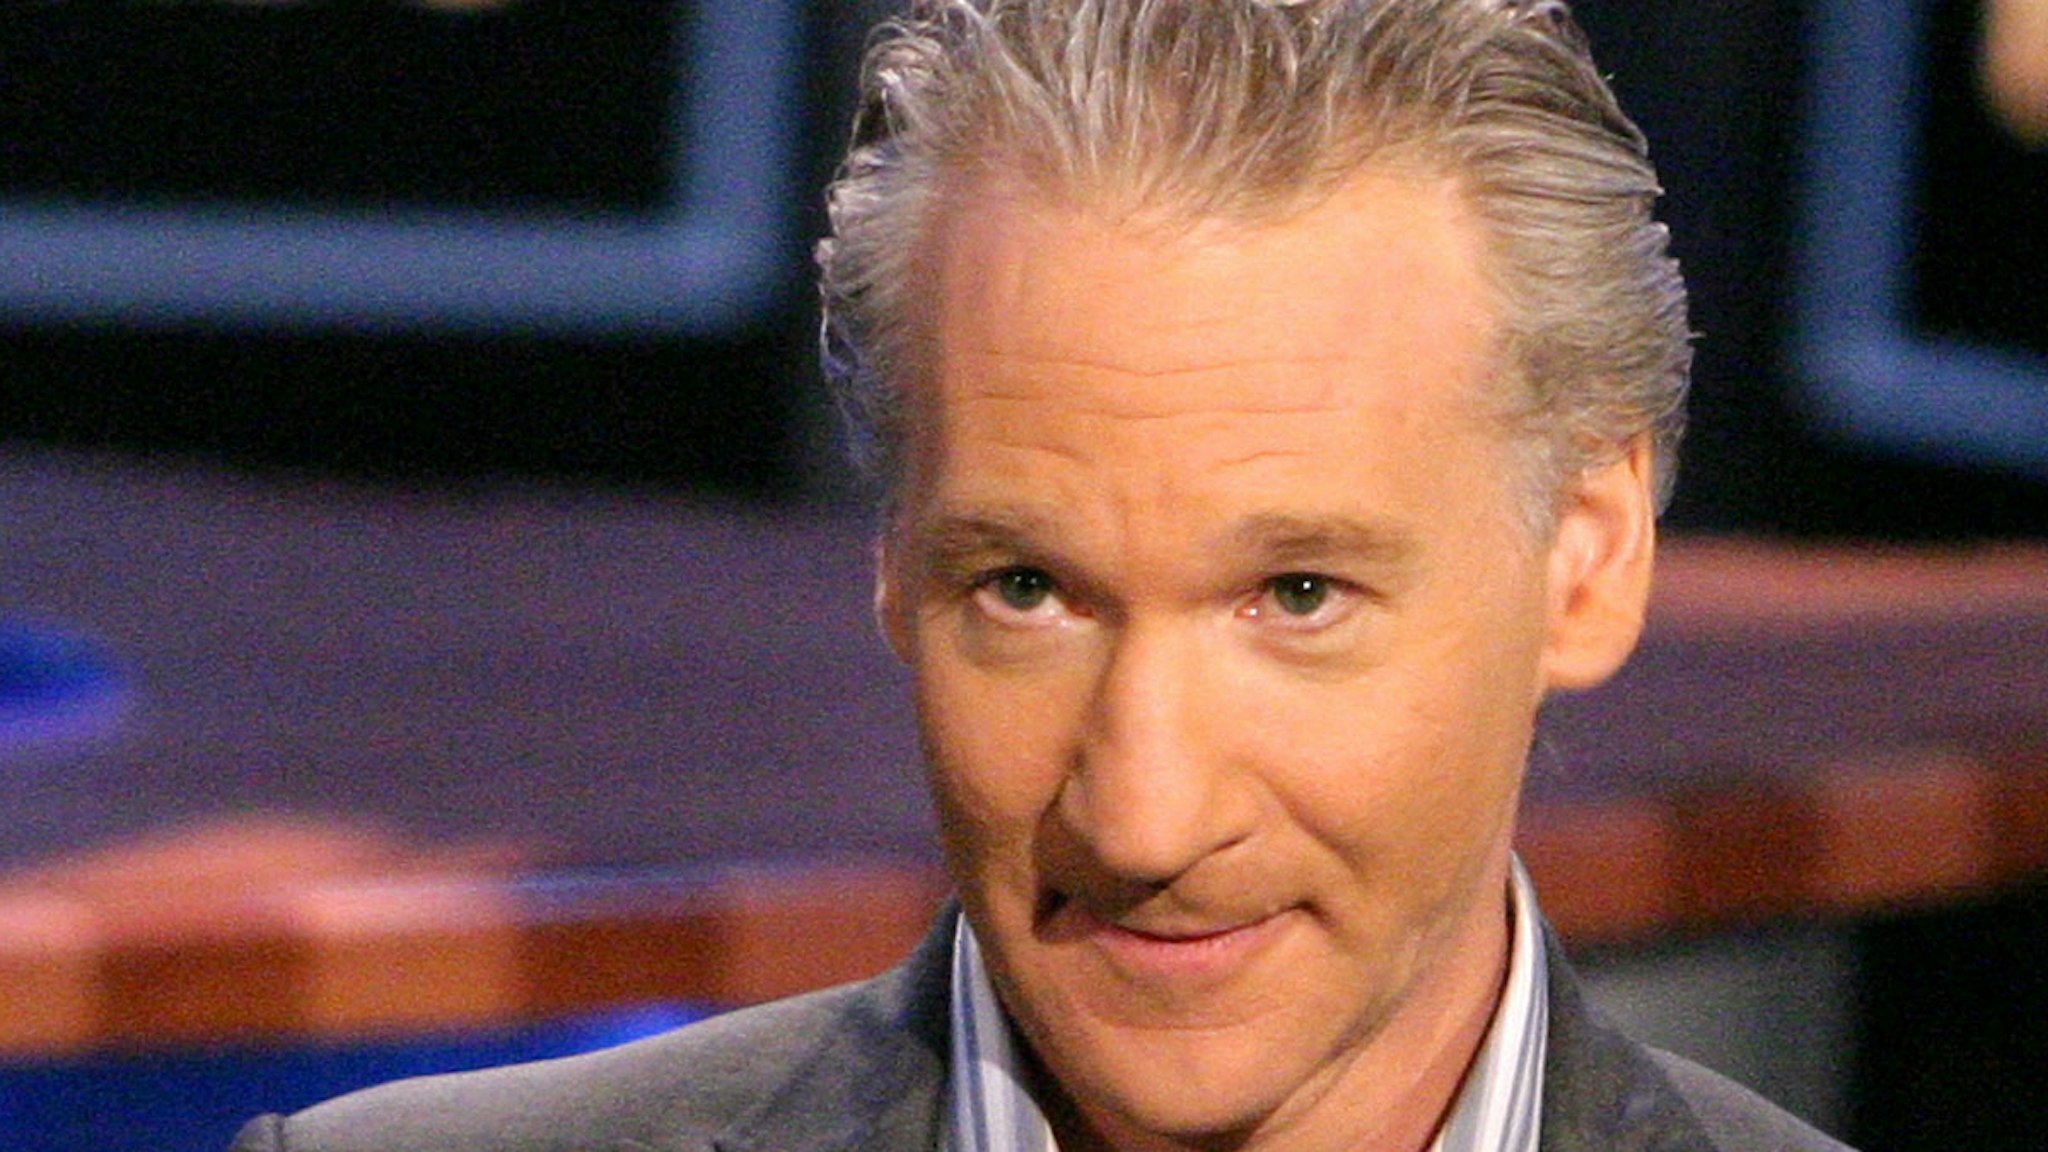 Bill Maher during HBO's Real Time With Bill Maher with Special Guest Governor Gray Davis at CBS Studios in Hollywood, California, United States.